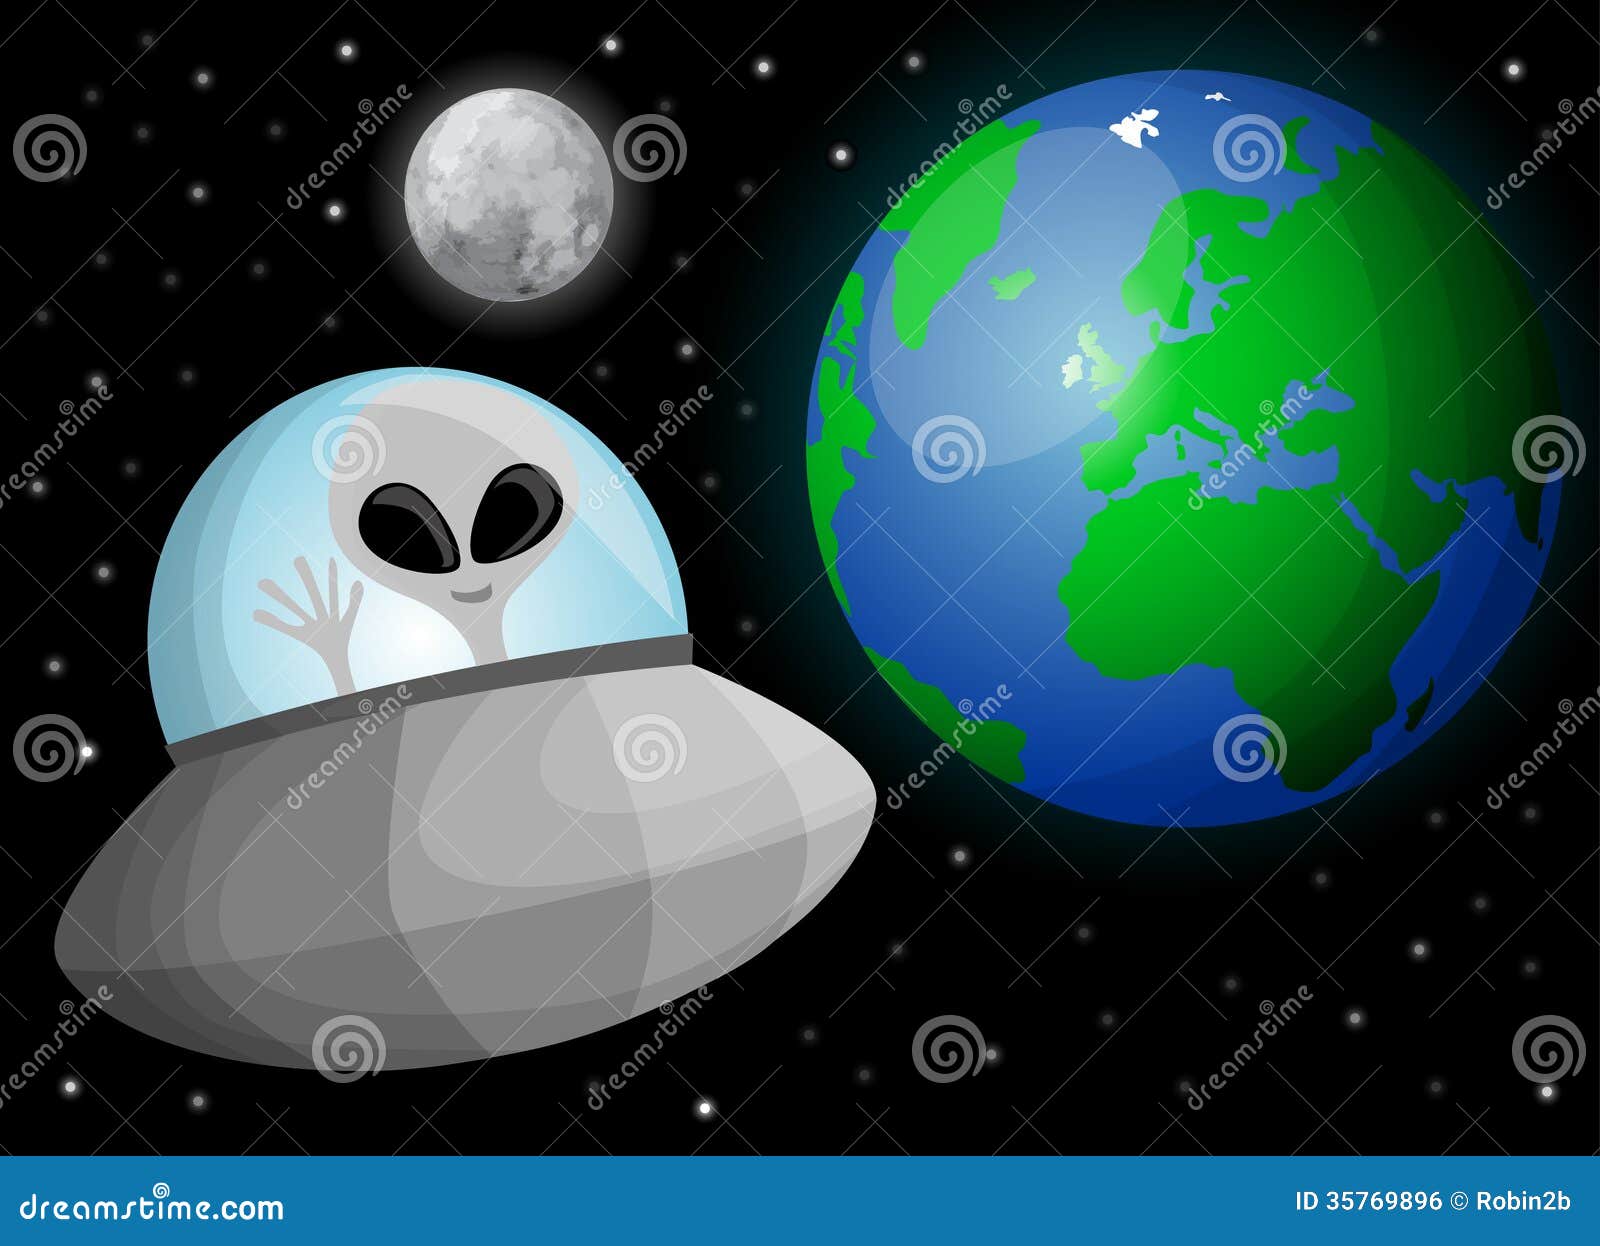 free tumblr themes cute Space Free Image Cartoon Cute Alien Stock Royalty In